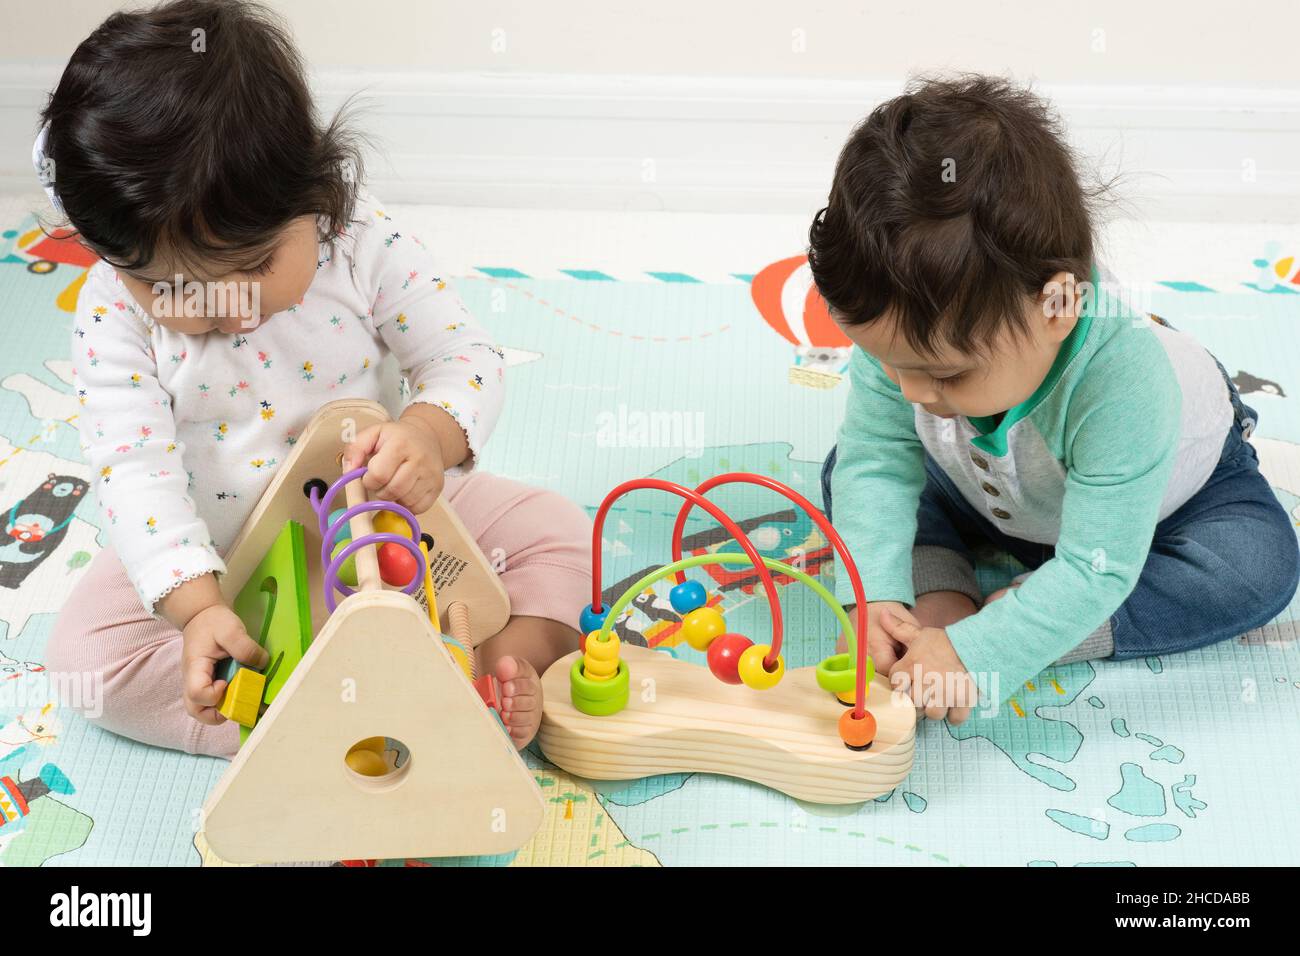 8 month old fraternal twin babies sitting near each other, both playing with toys Stock Photo